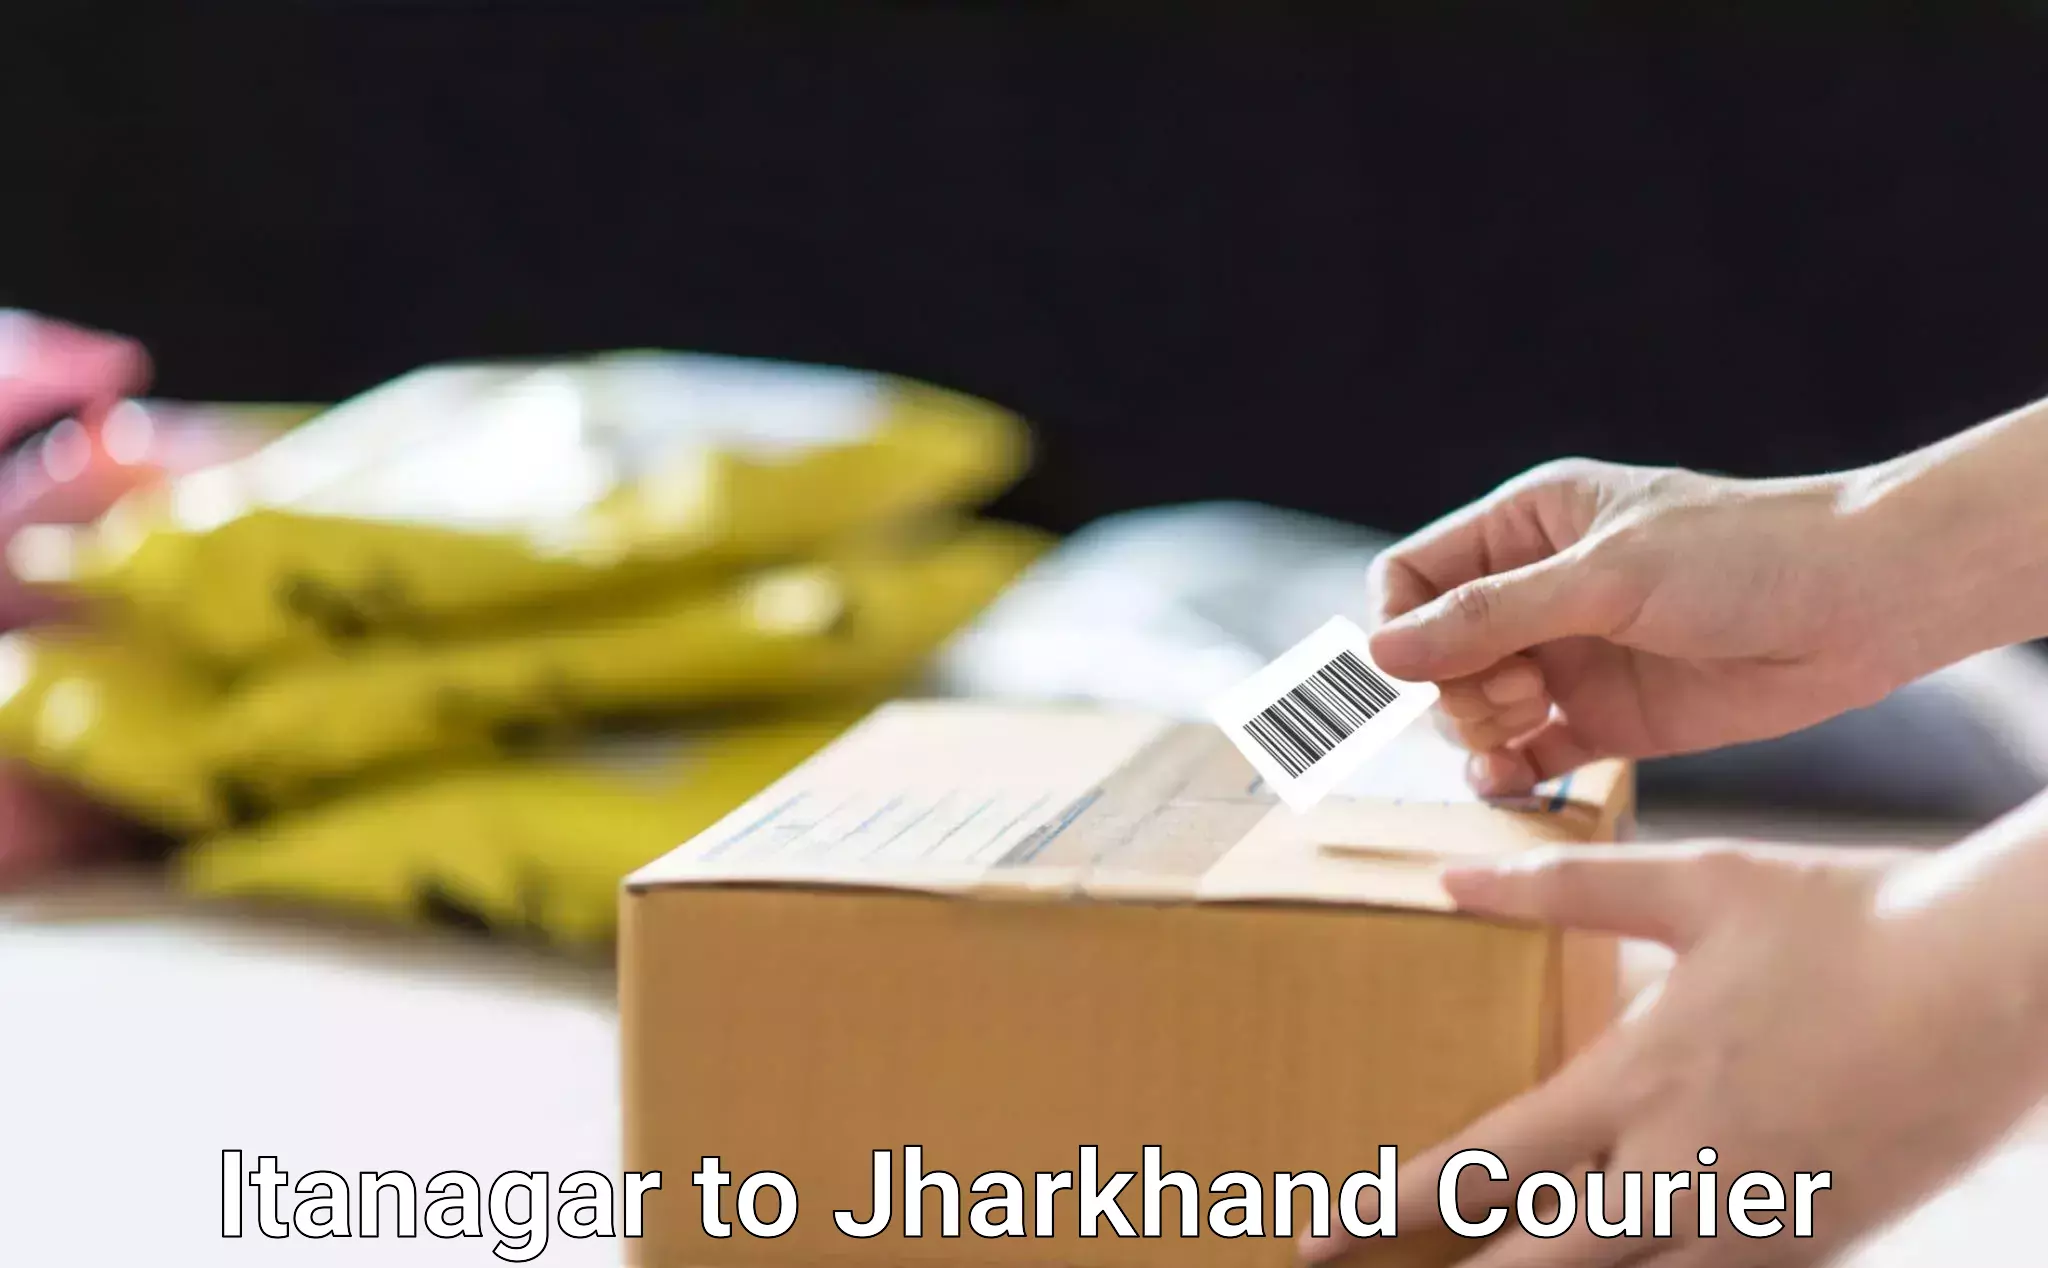 Global courier networks Itanagar to Jharkhand